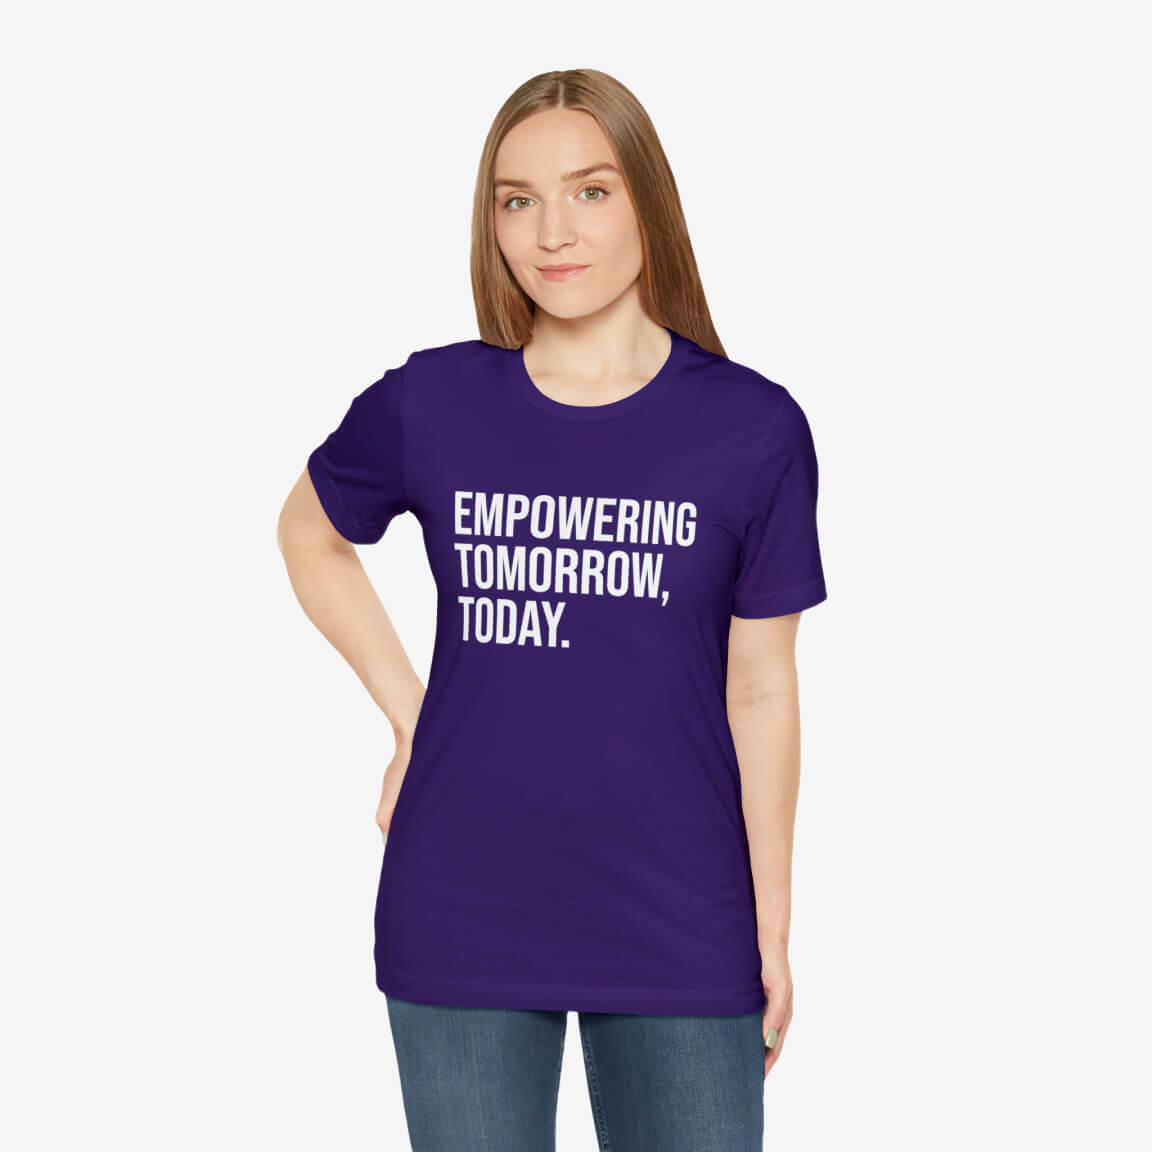 A woman wearing a purple custom t-shirt with text saying “Empowering Tomorrow, Today”.